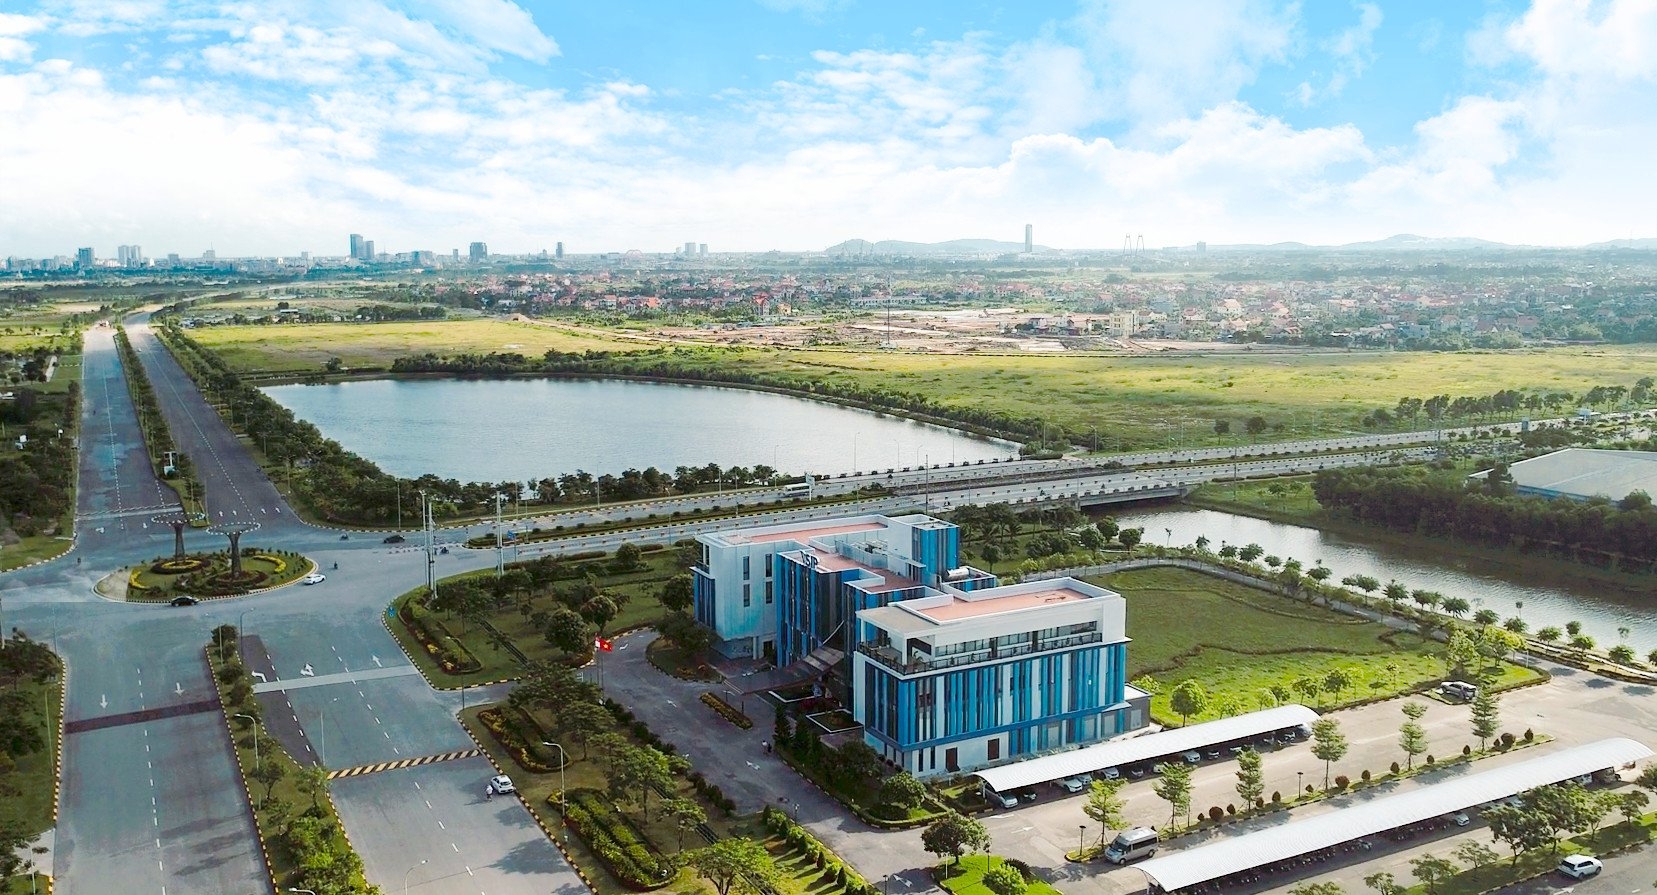 VSIP Haiphong – 10-year journey to affirm position in the port city of Haiphong